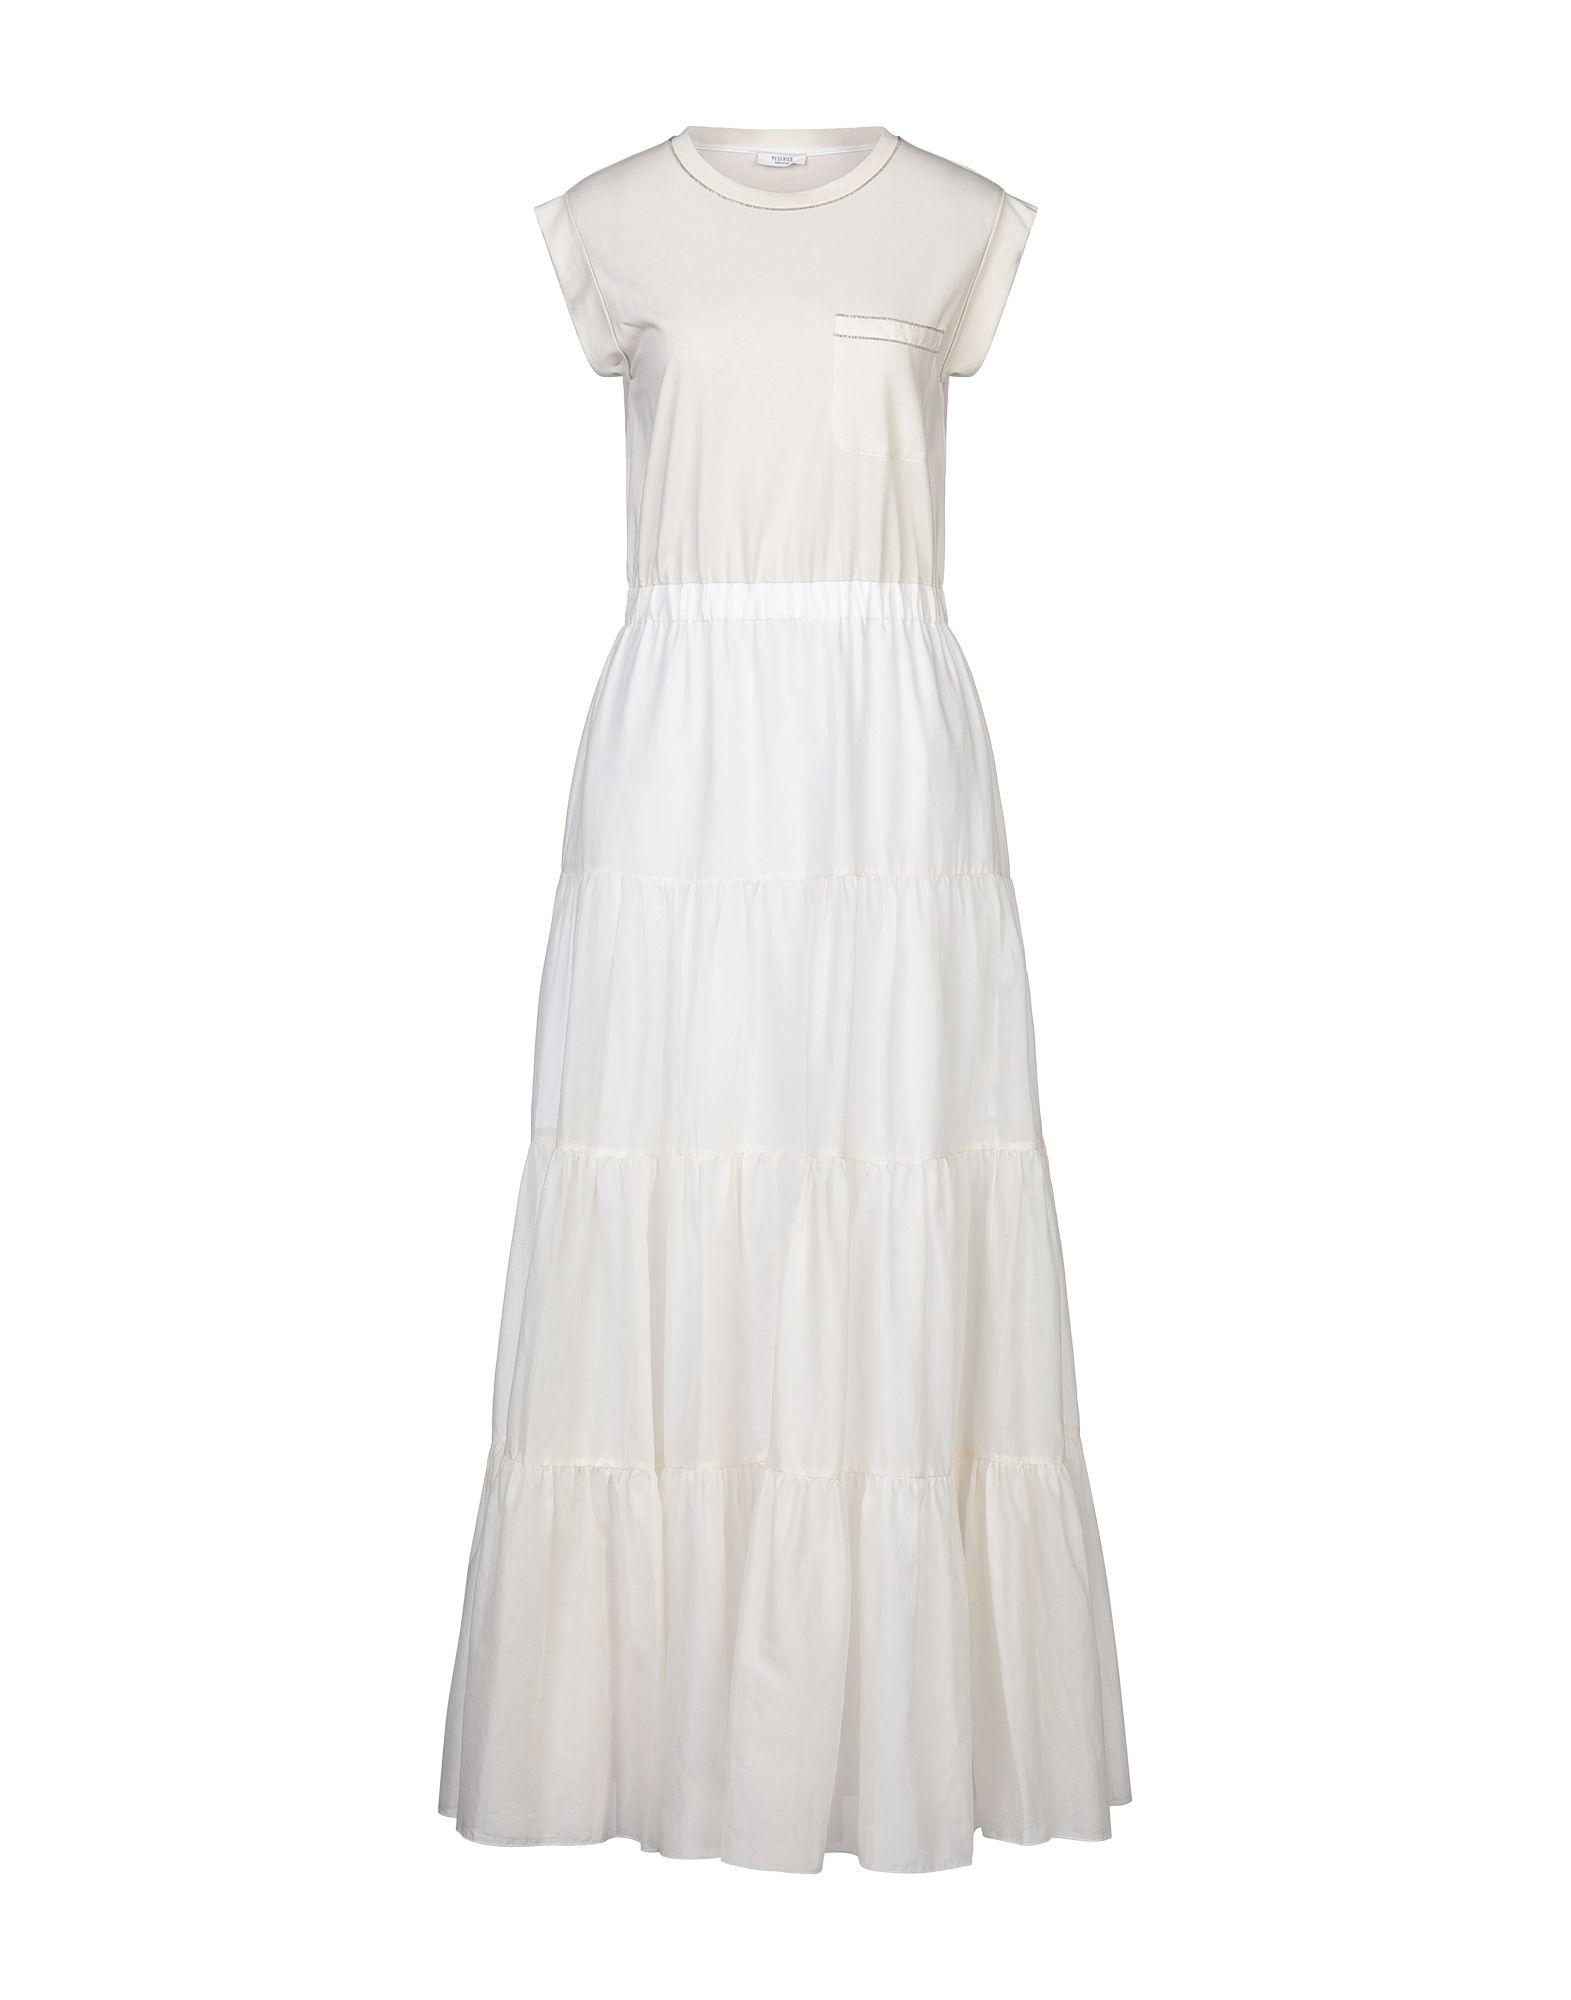 Peserico Cotton Long Dress in Ivory (White) - Lyst